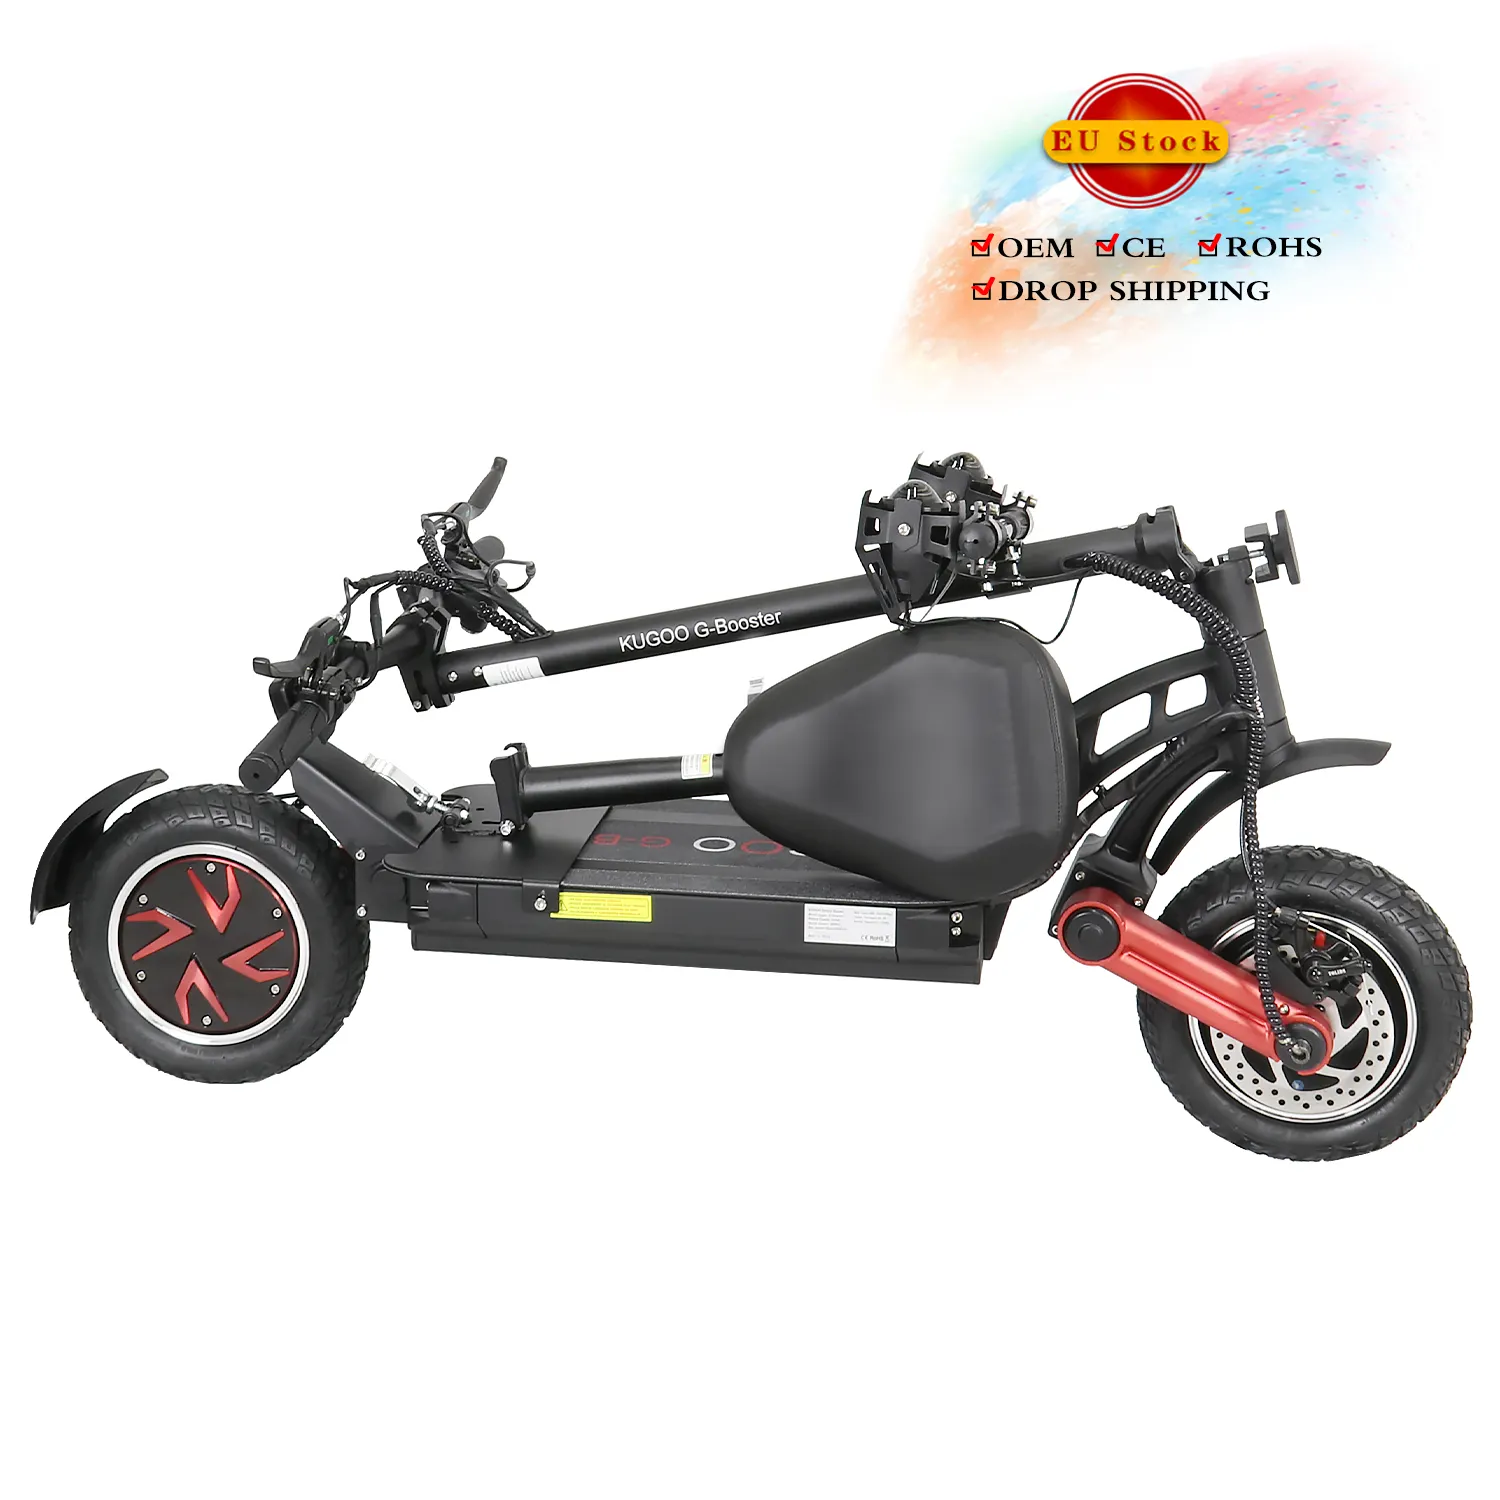 EU warehouse Kugoo G Booster 48v 23AH 18650 lithium battery 800w*2 dual motor G-Booster electric e scooter